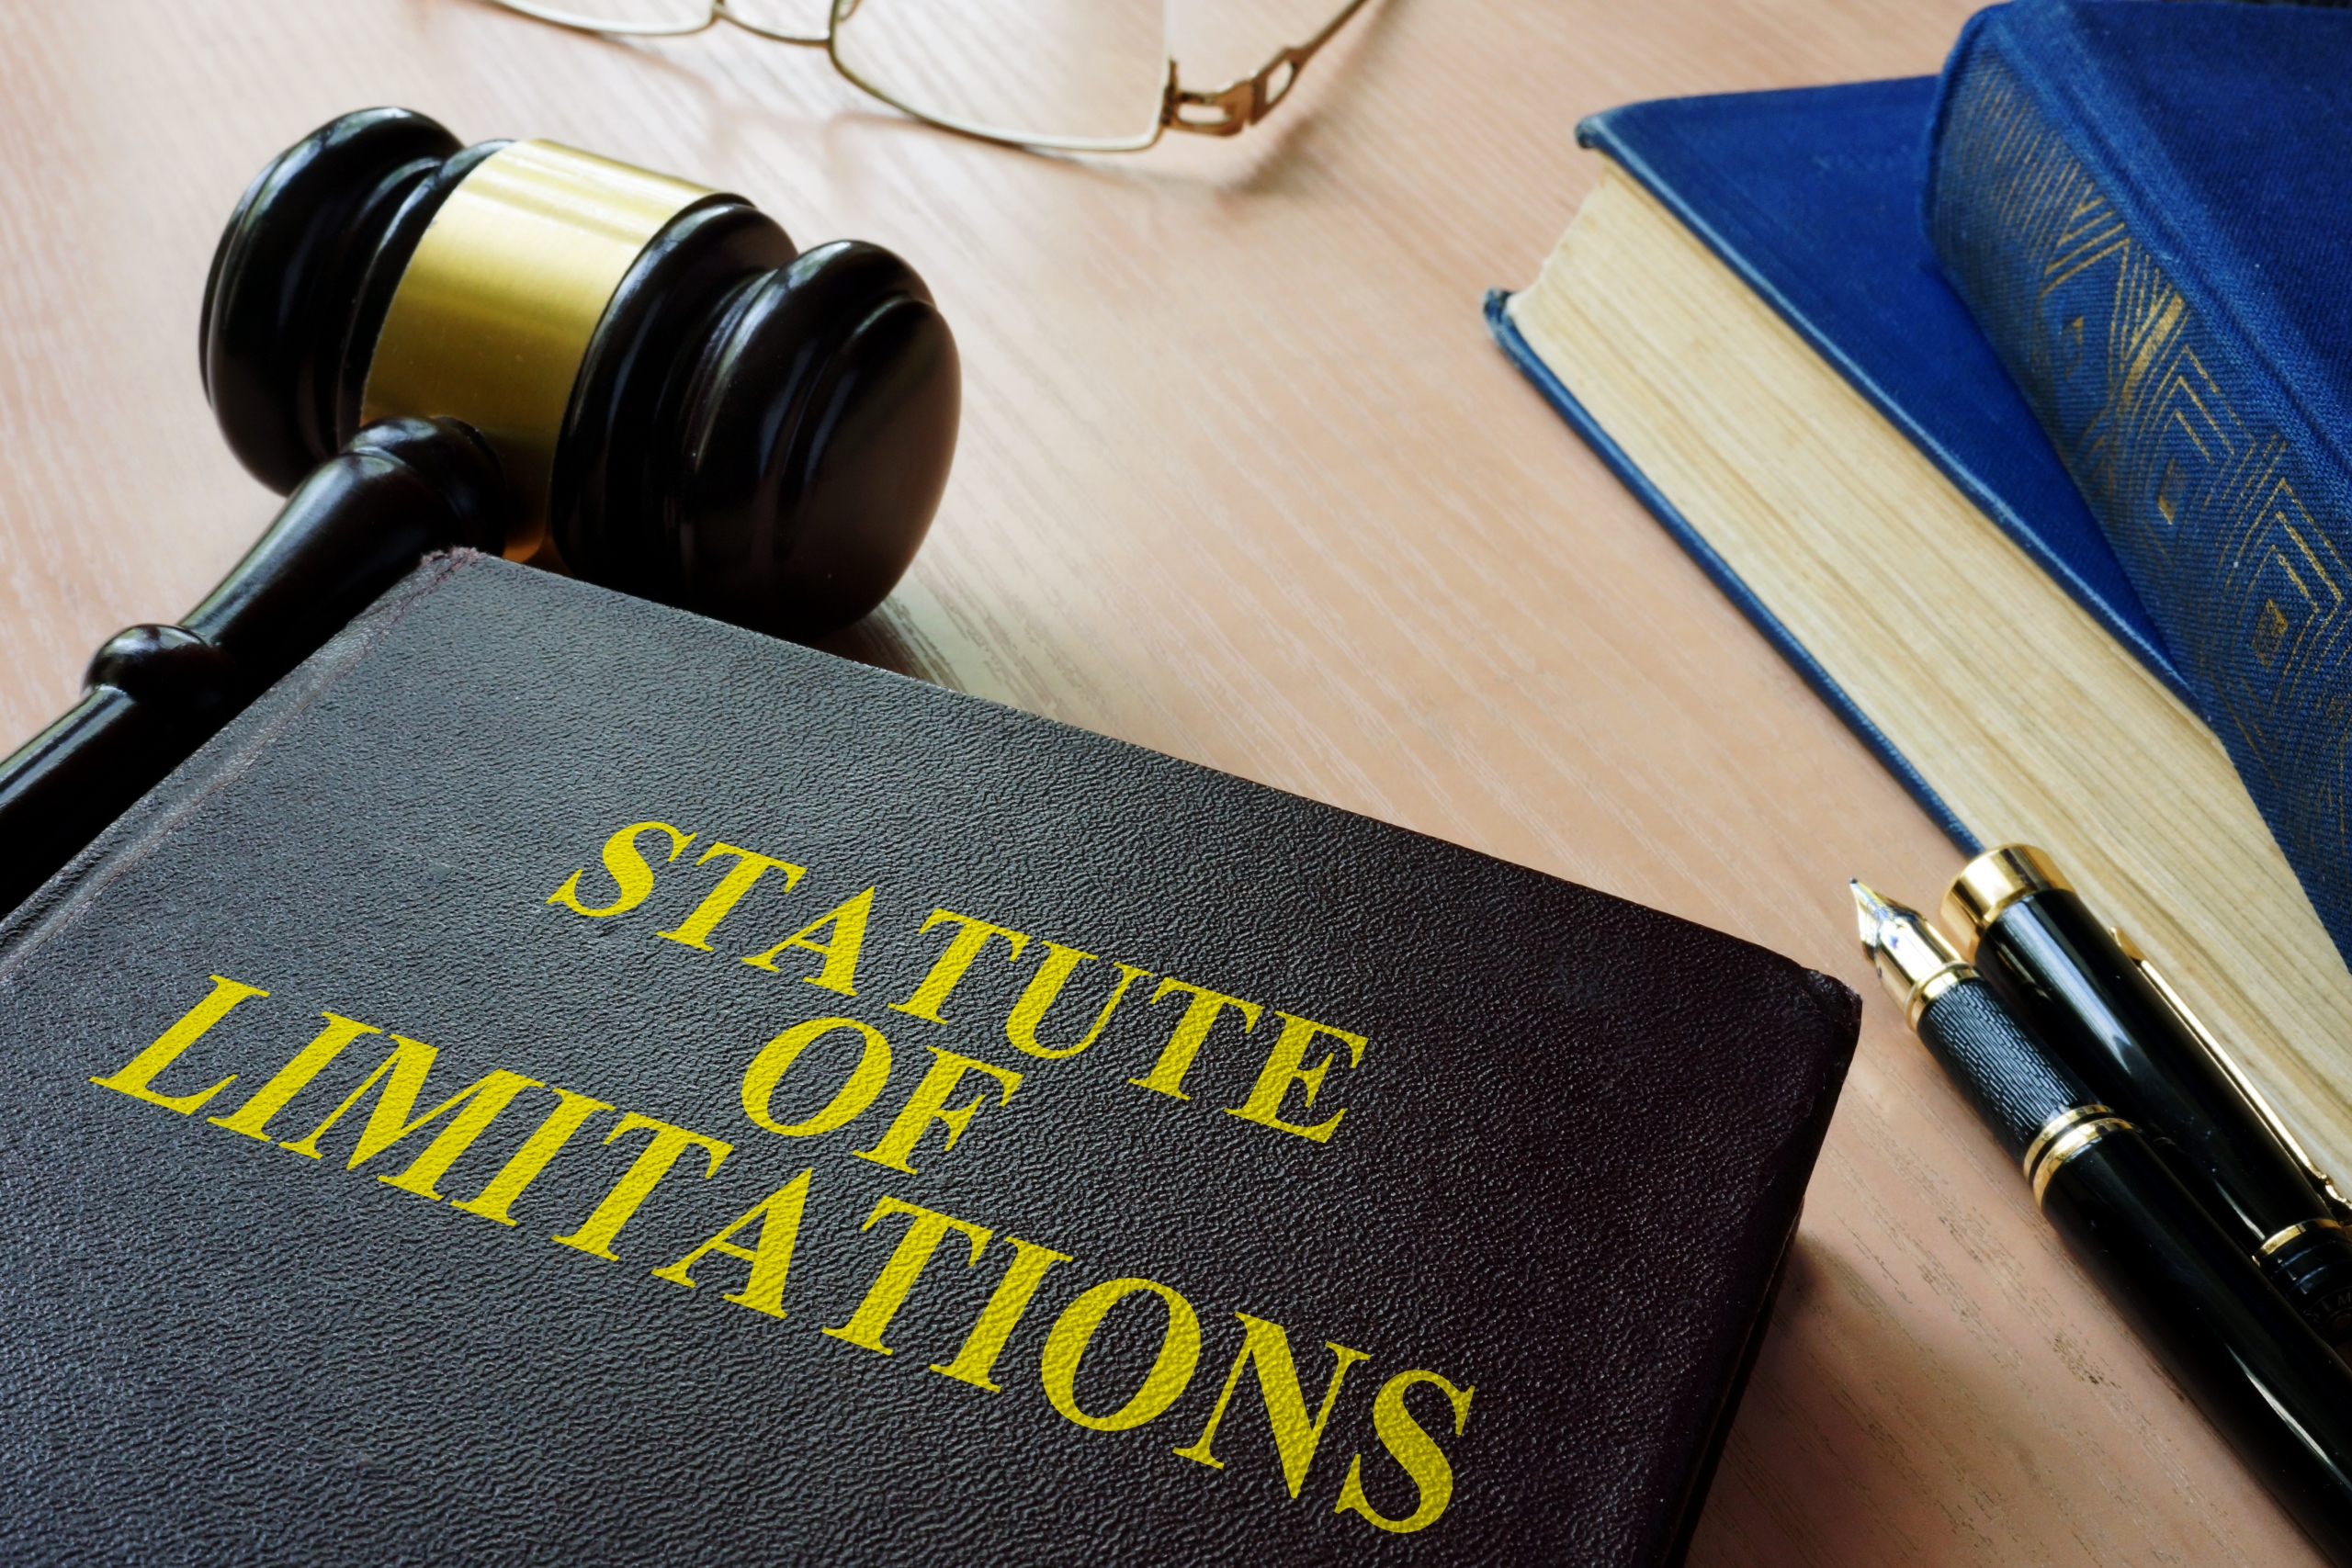 Statute of limitations for initiating lawsuits for division of inheritance in Vietnam